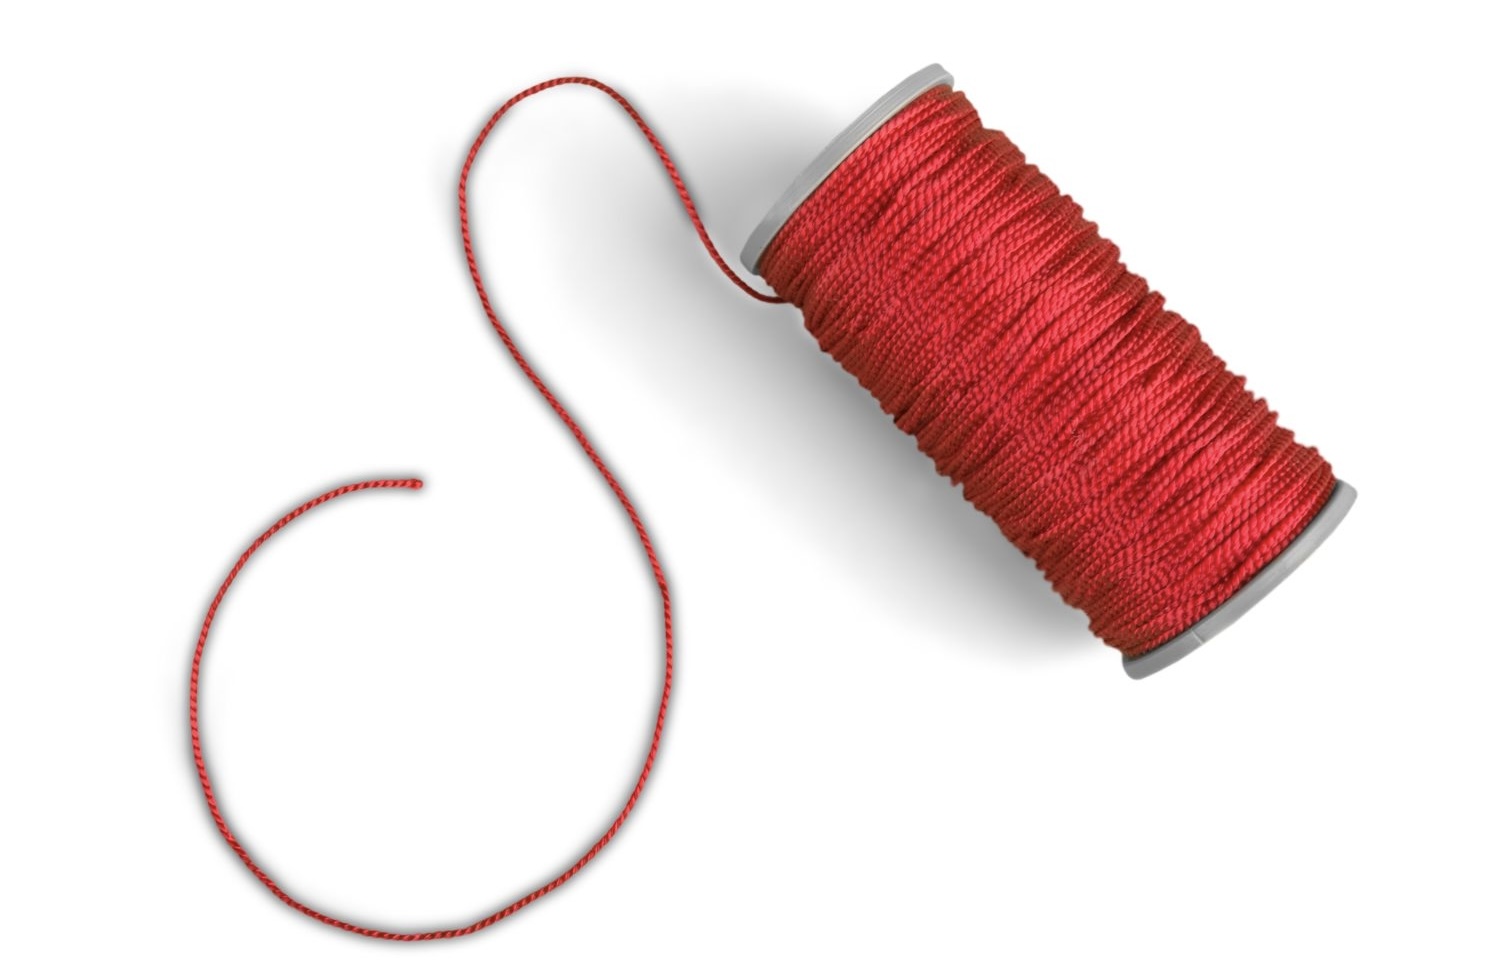 image shows a spool of red thread